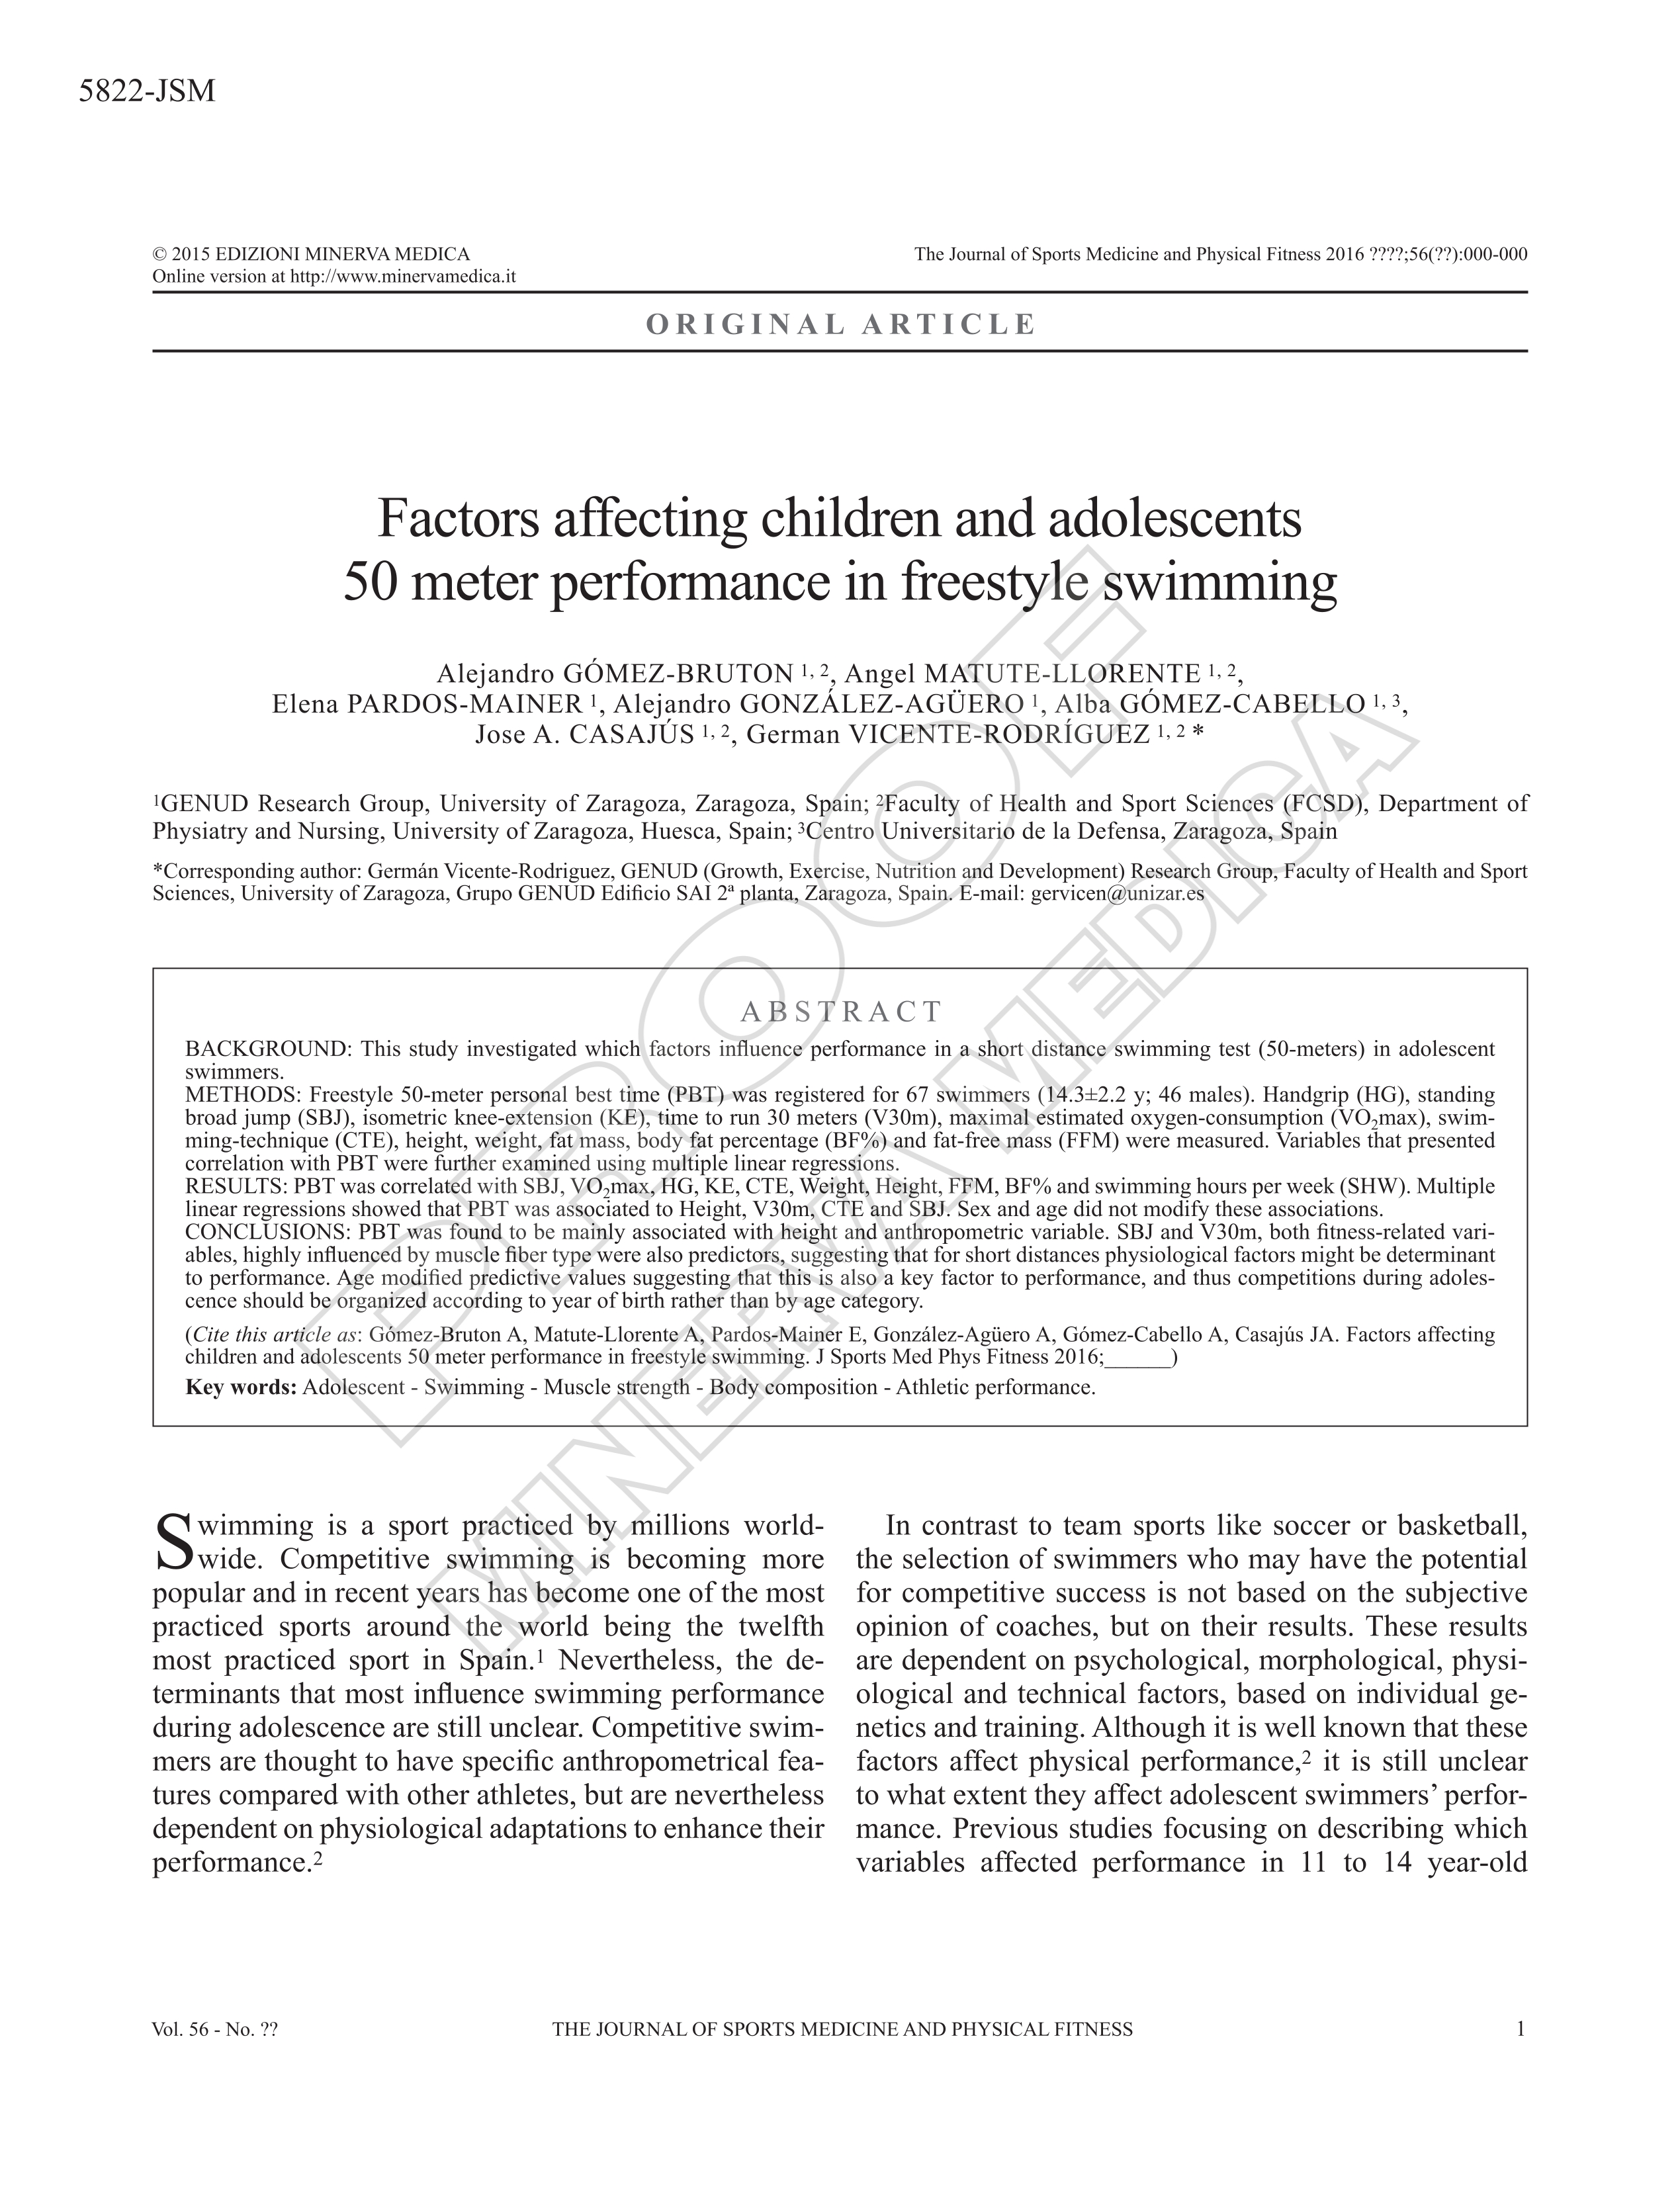 Factors affecting children and adolescents 50 meter performance in freestyle swimming.